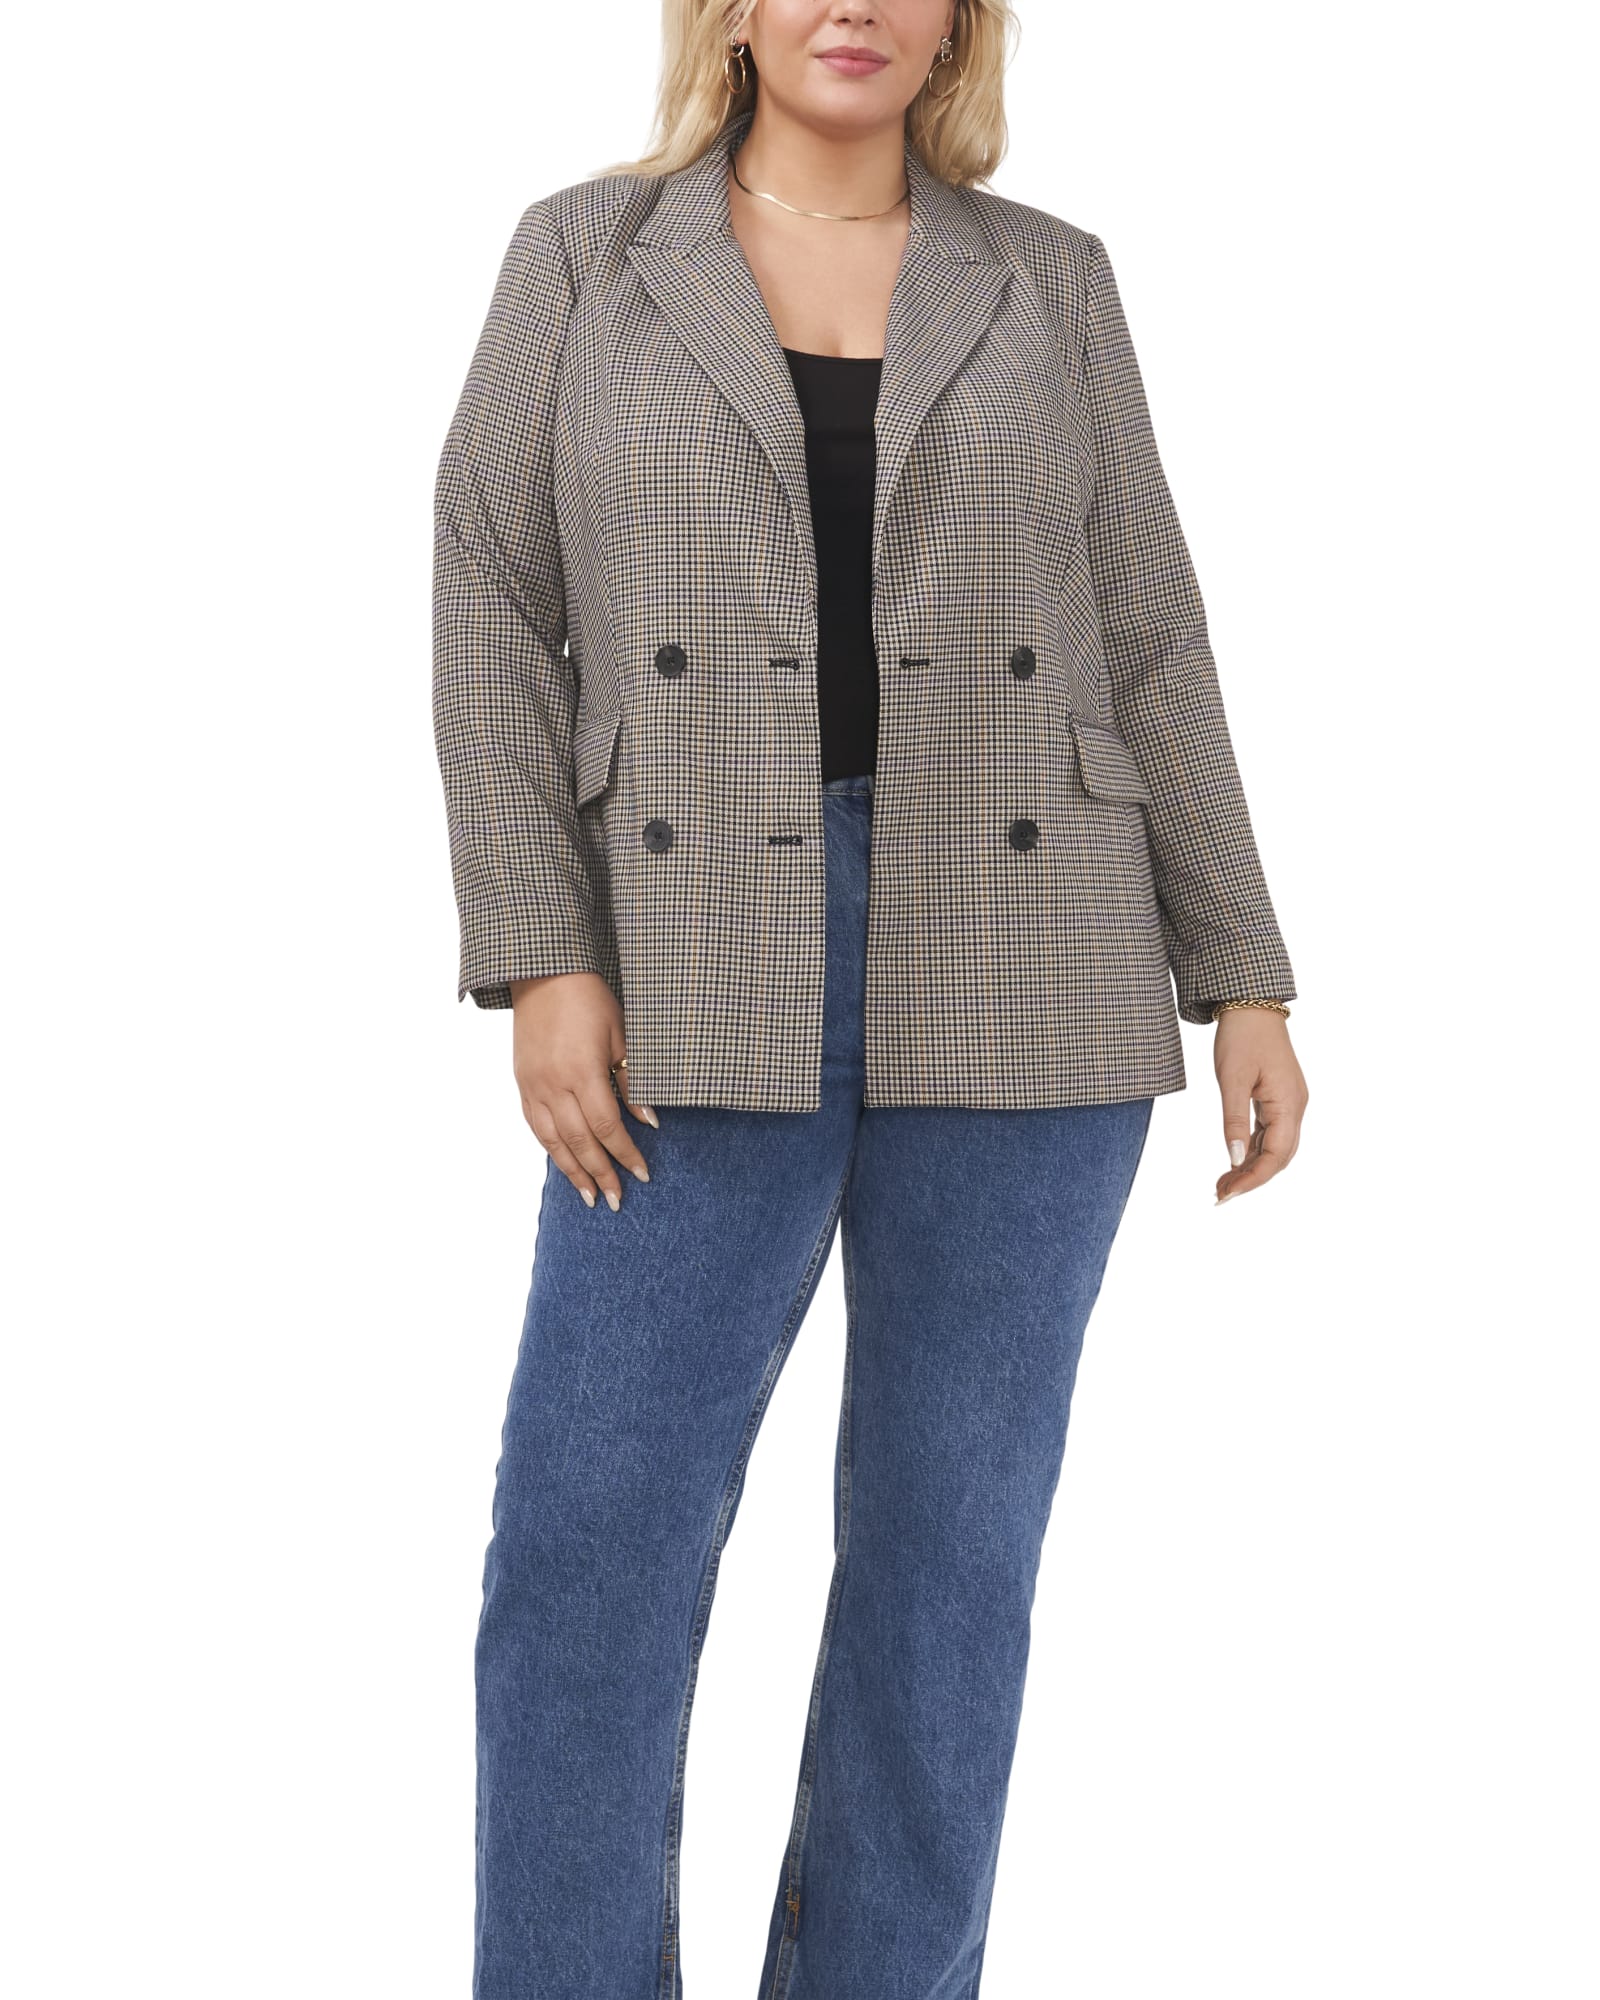 Plus Size Winter Coats for Women Warm Plaid Sherpa Fleece Lined Distressed  Jackets Single Breasted Faux Outerwear at  Women's Coats Shop